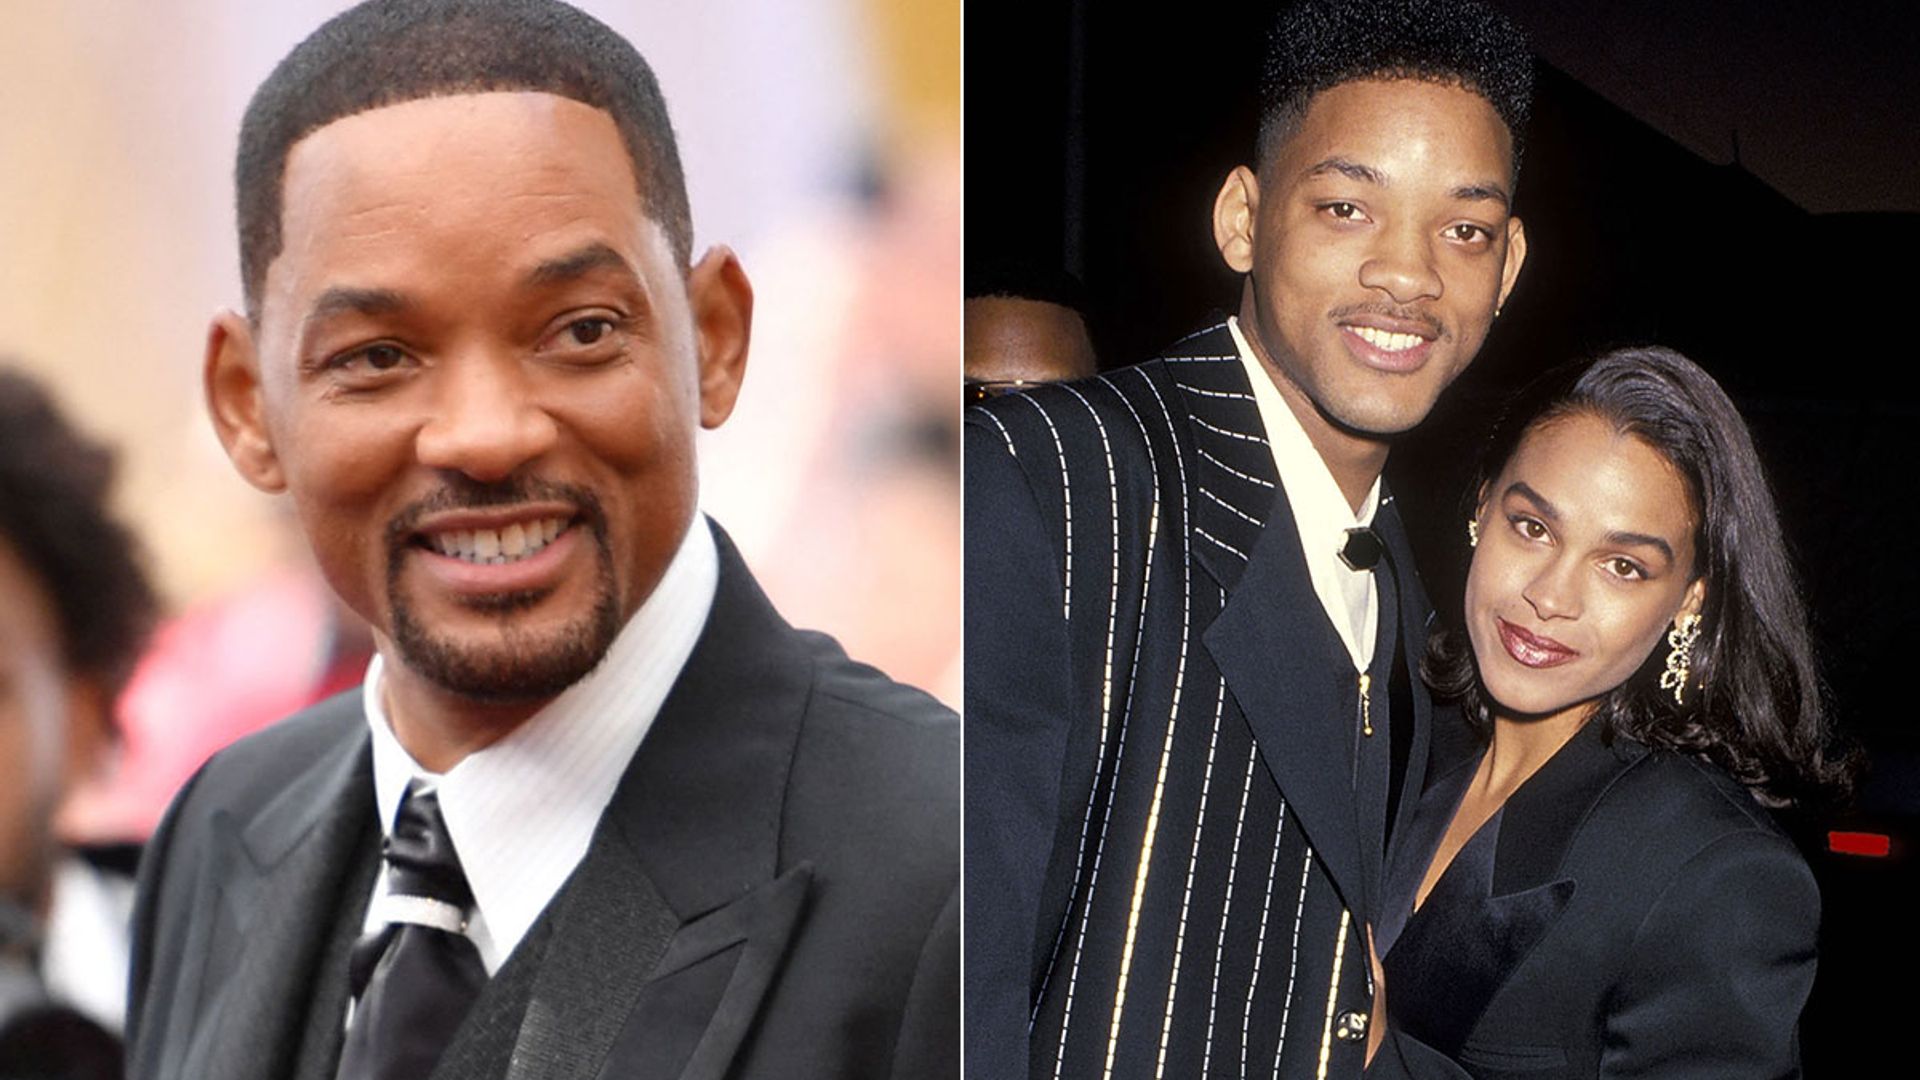 Will Smith and ex-wife Sheree Zampino spark reaction as they reunite at the Oscars - 'Family first'